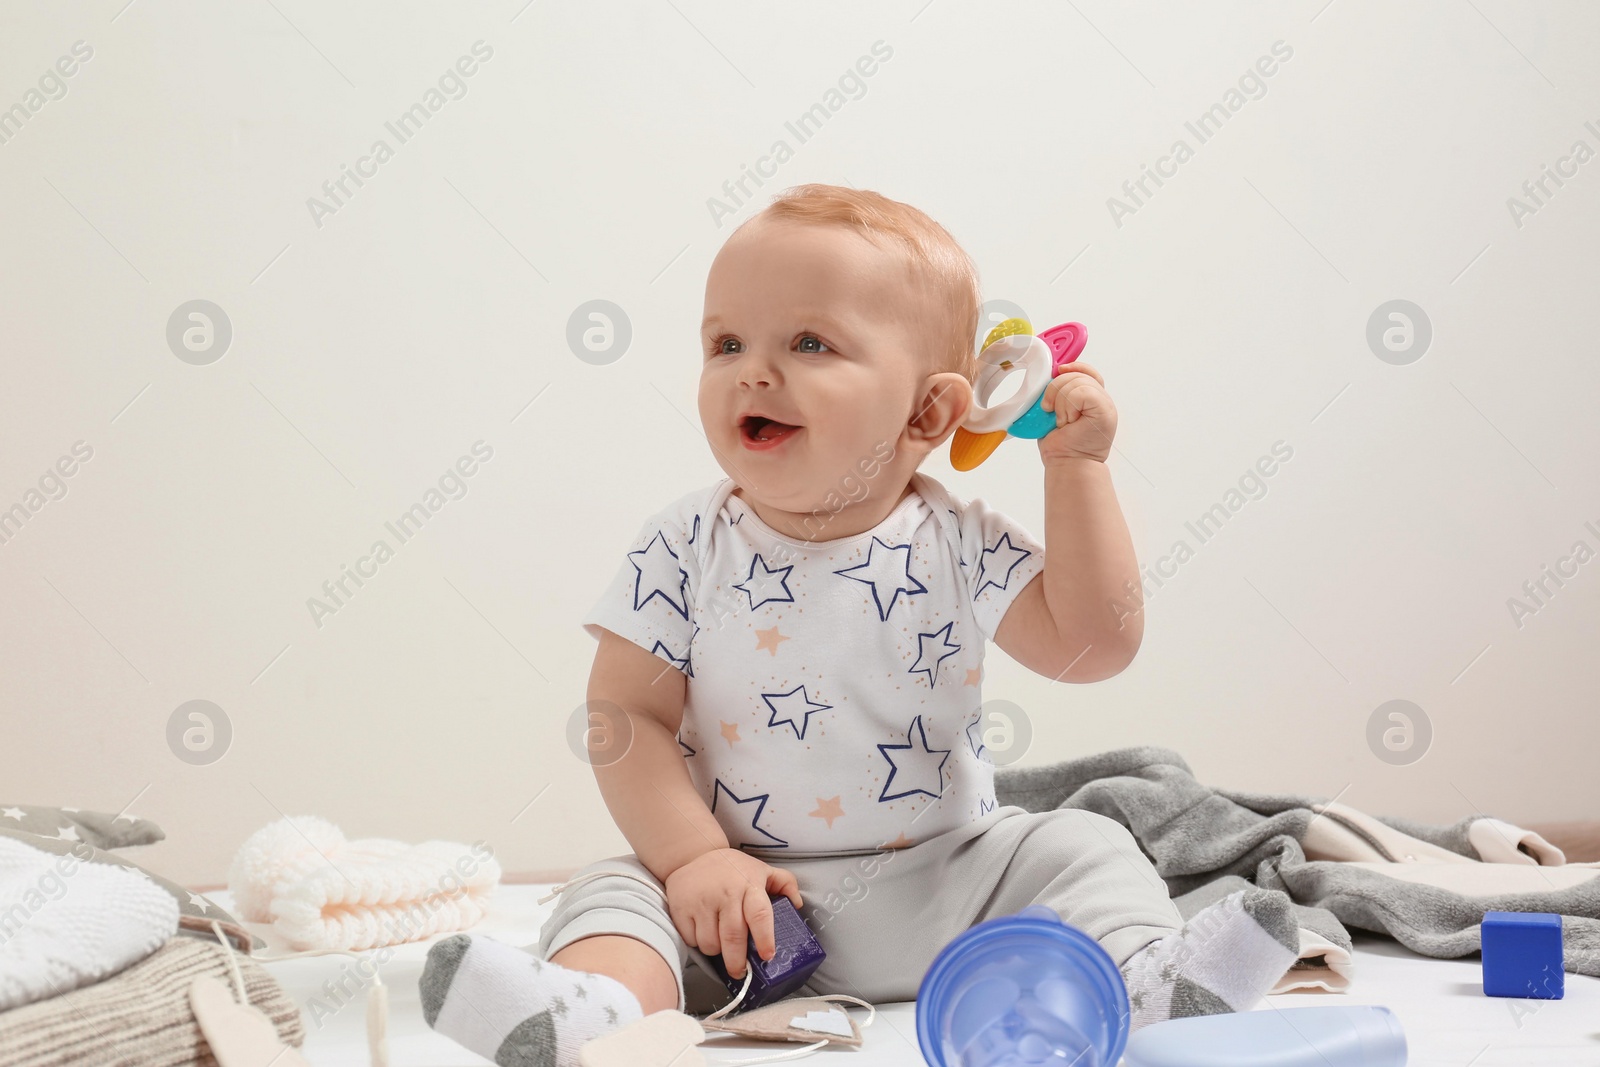 Photo of Little boy in cute clothes sitting on floor against light background. Baby accessories